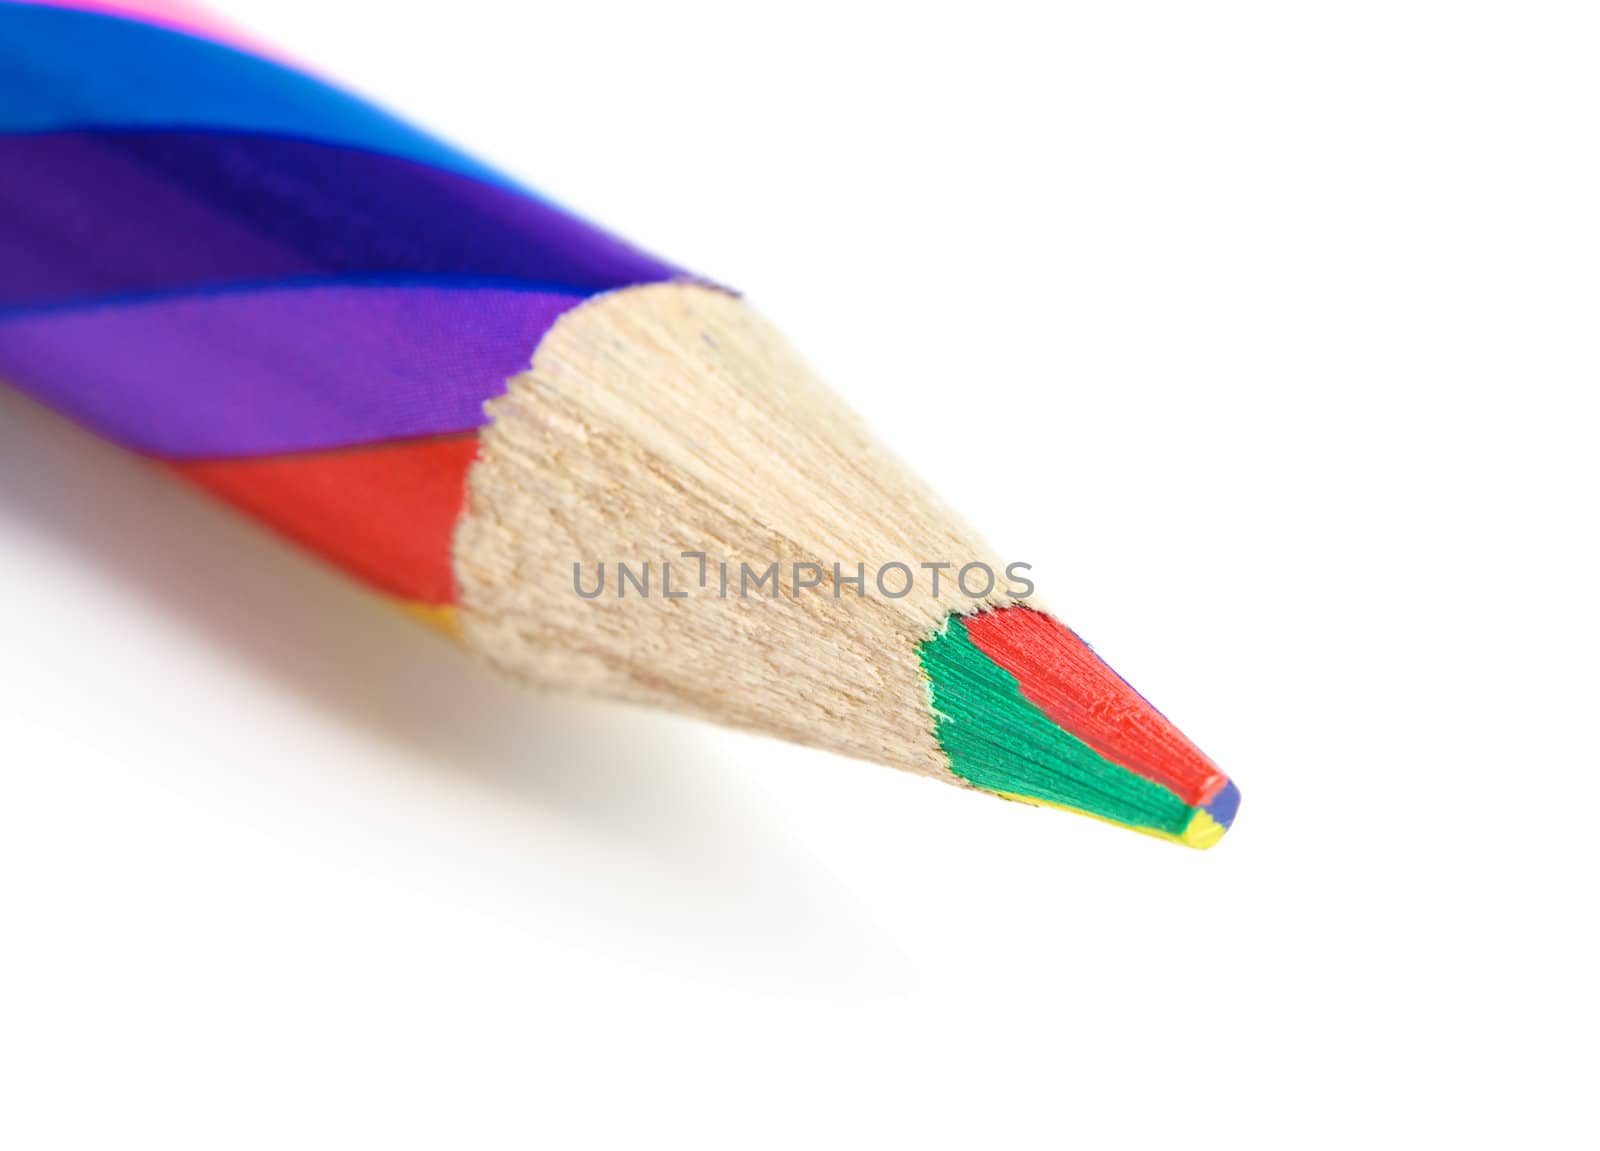 striped colorful pencil isolated on white background